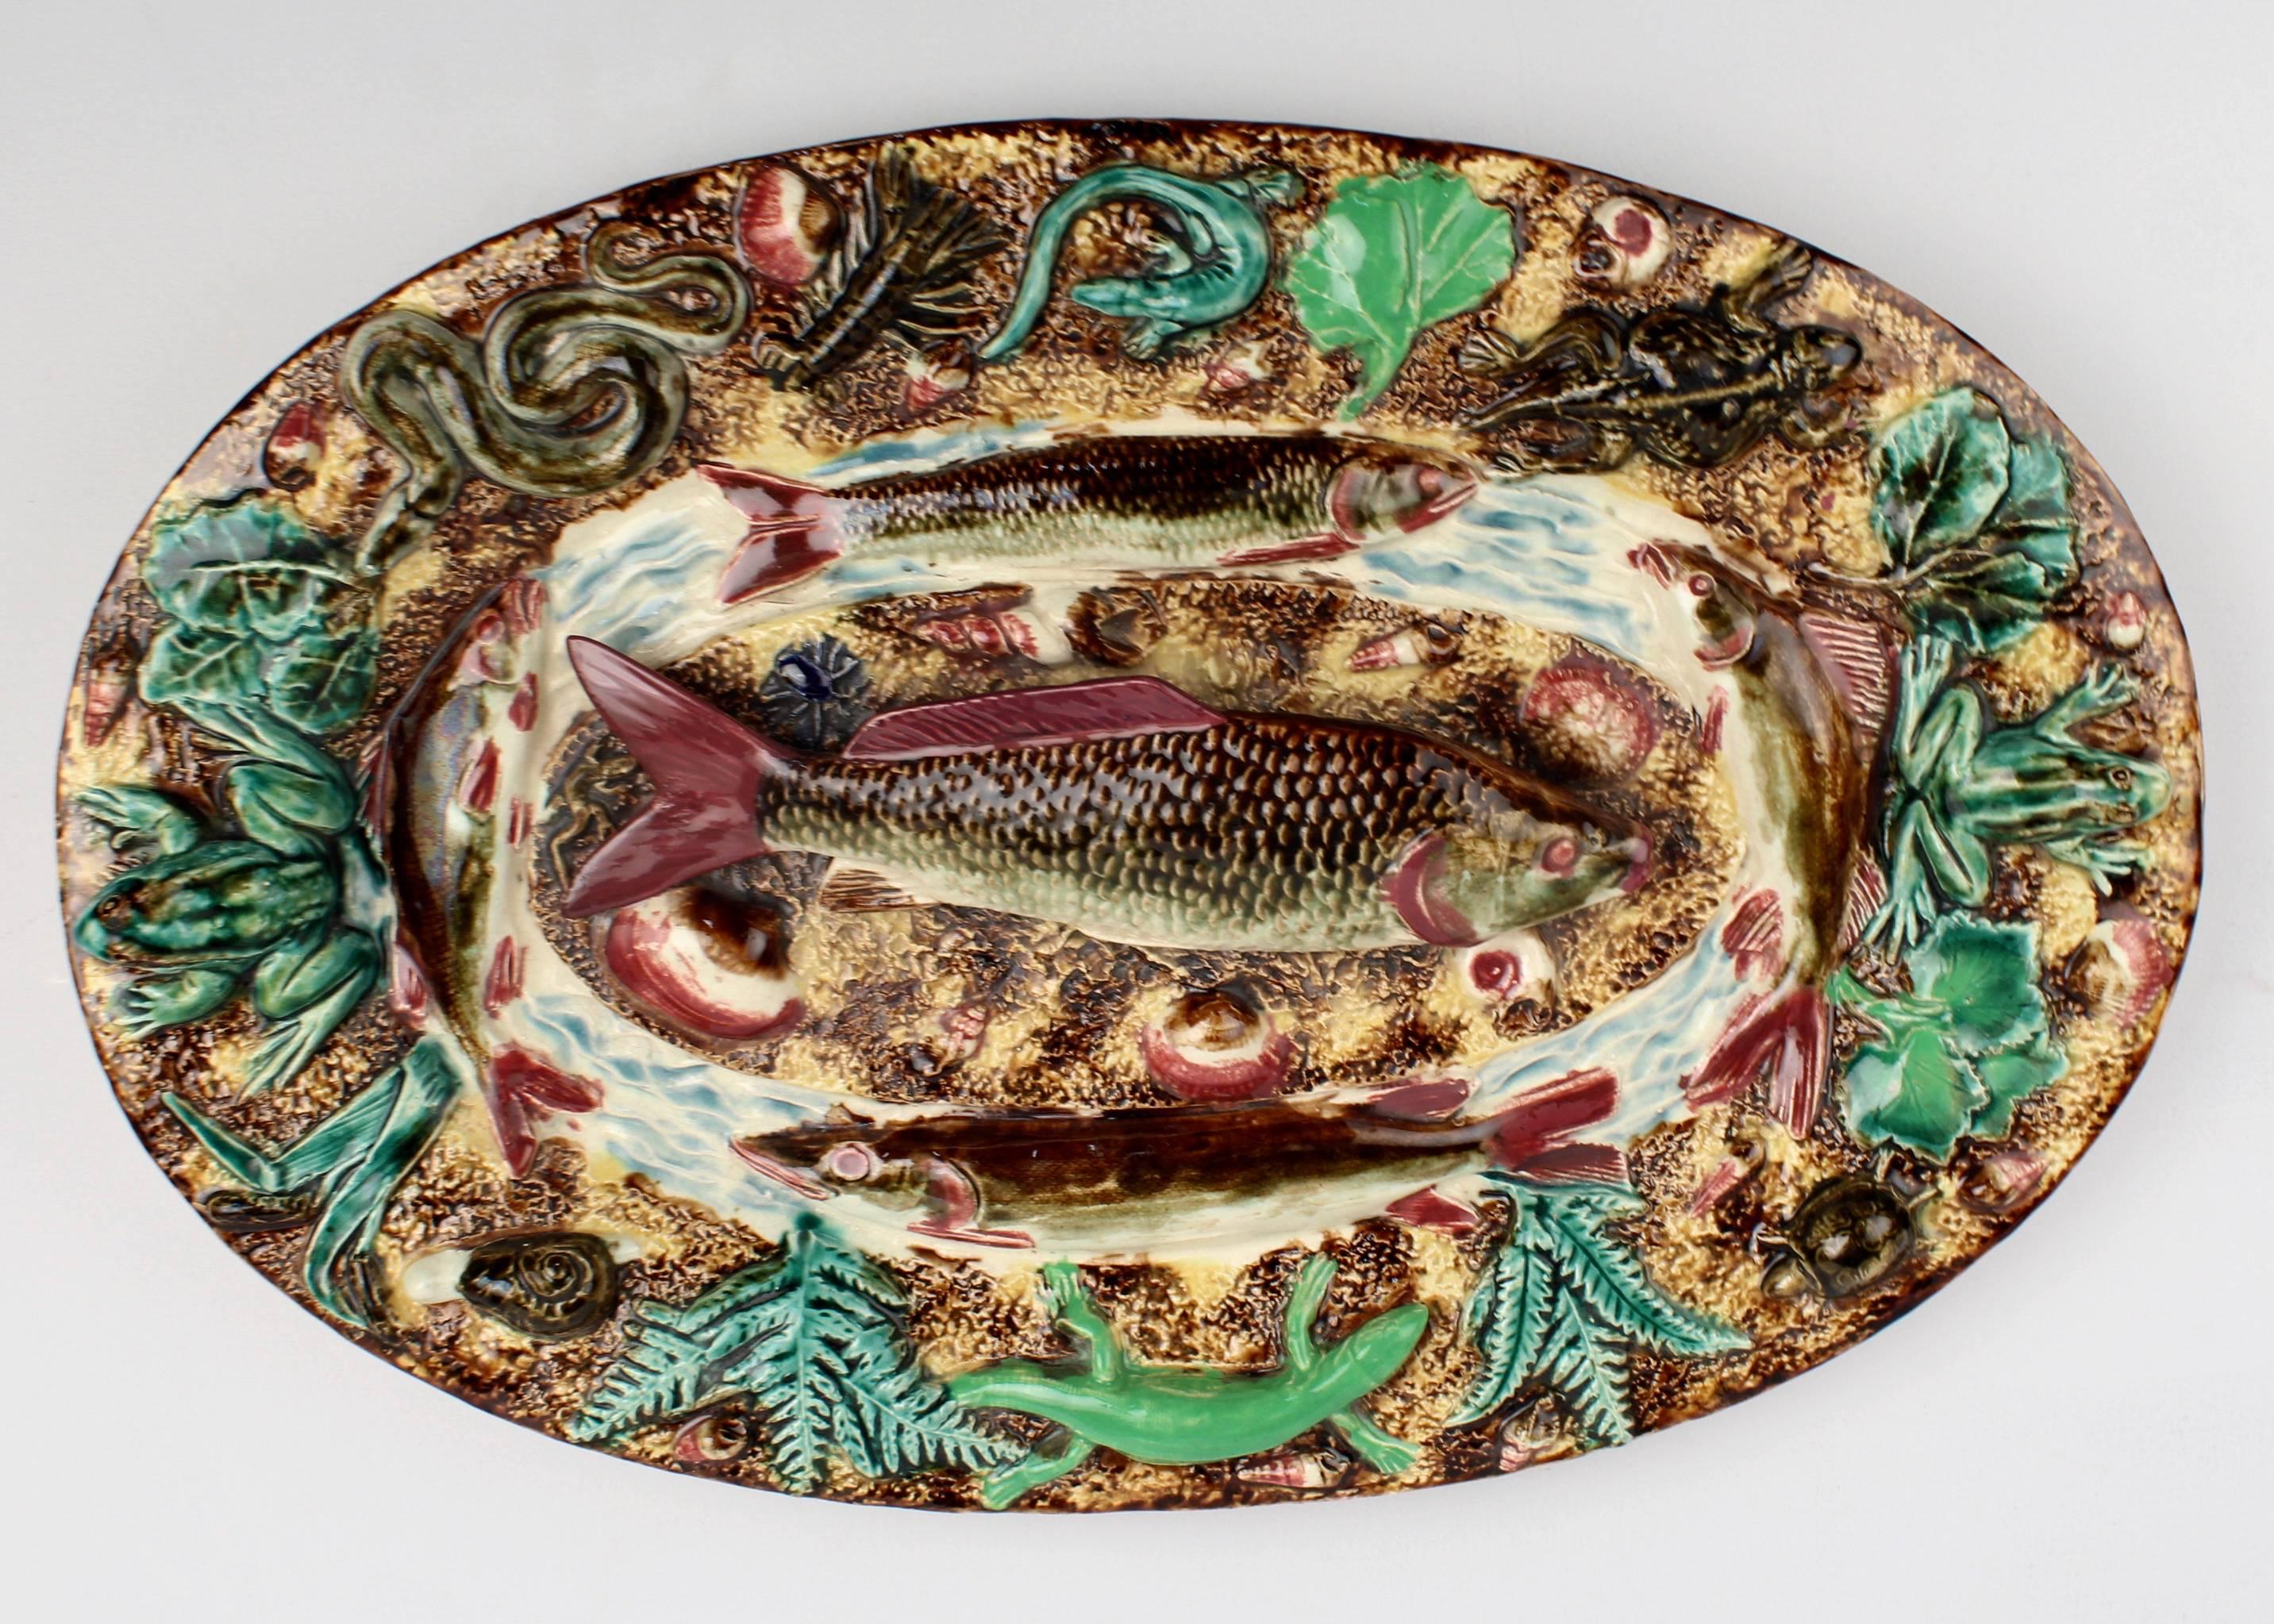 A 19th century French Majolica Palissy tray replete with amphibian and aquatic life.

A large fish rests at the center of the tray and is surrounded by salamanders, frogs, snails and water plants in burgundies, browns and greens.

Width: ca. 20